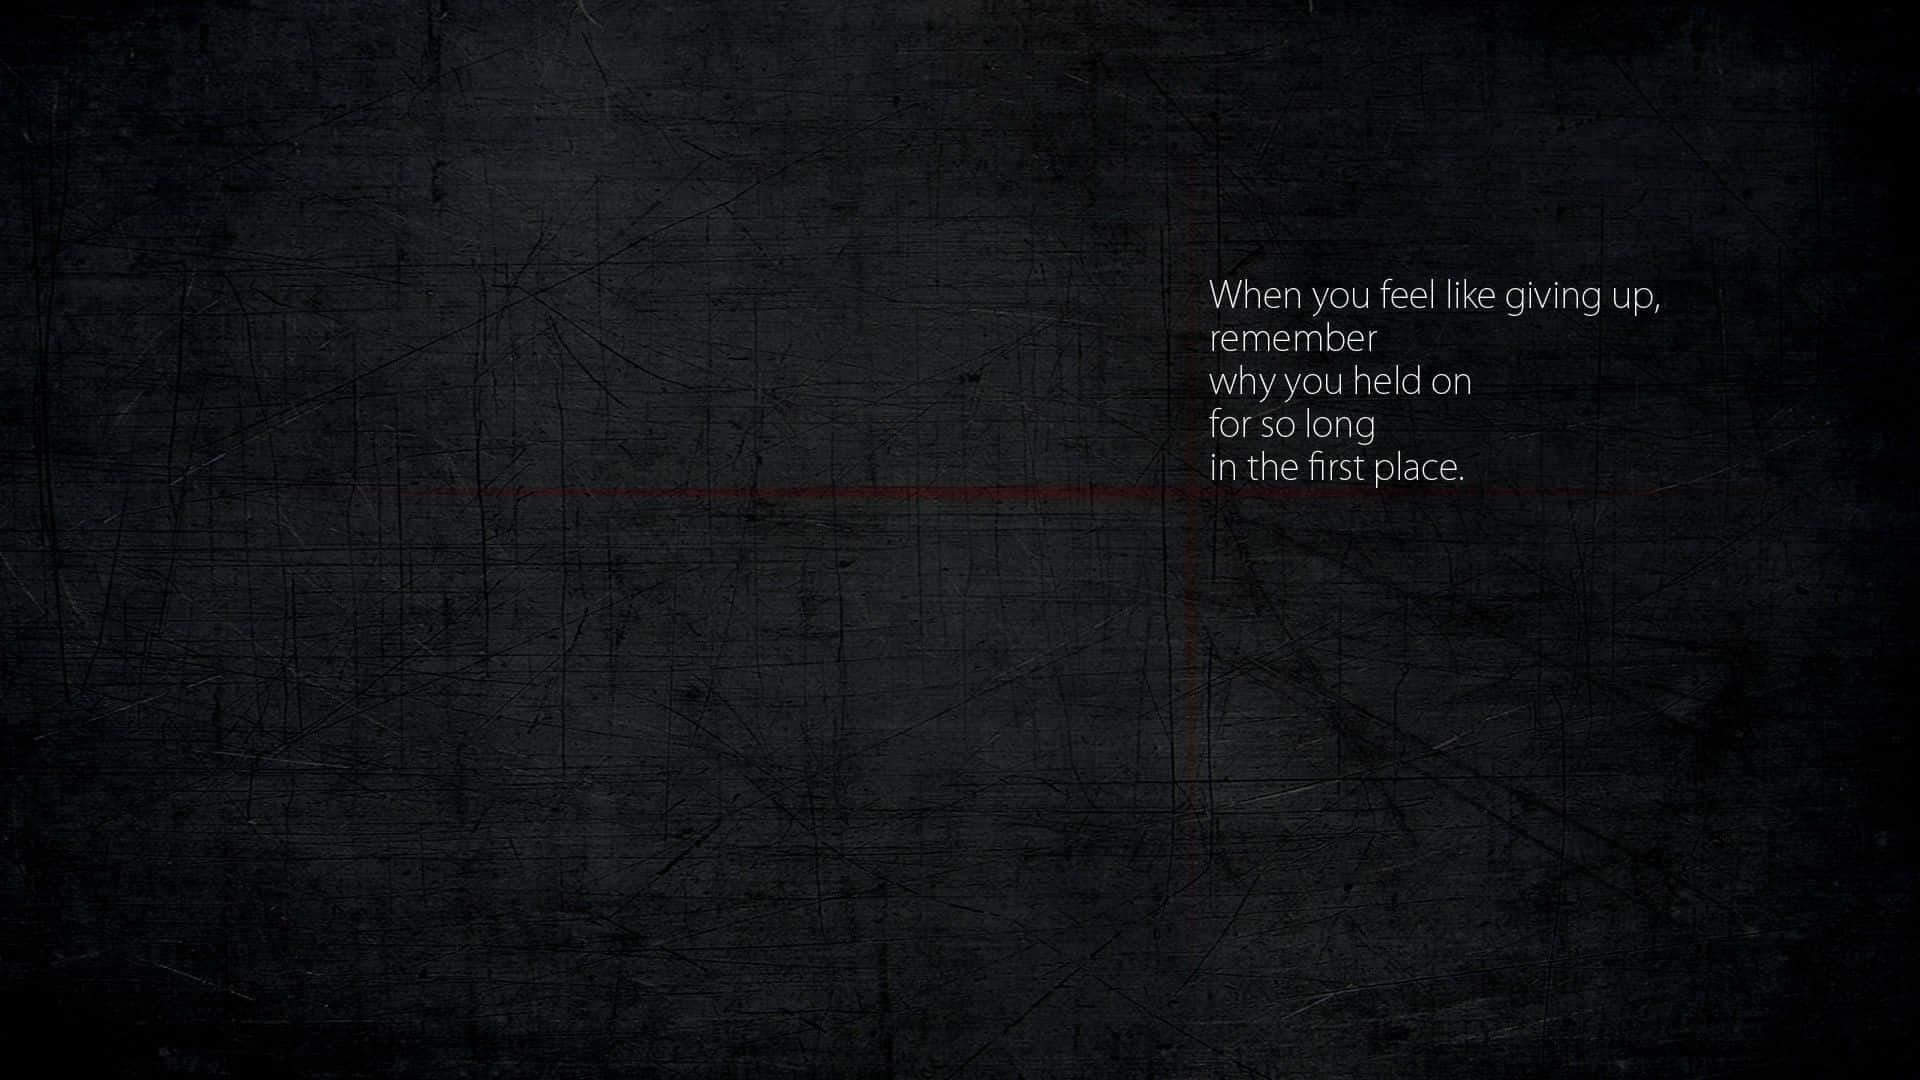 Inspirational quote on a dark background